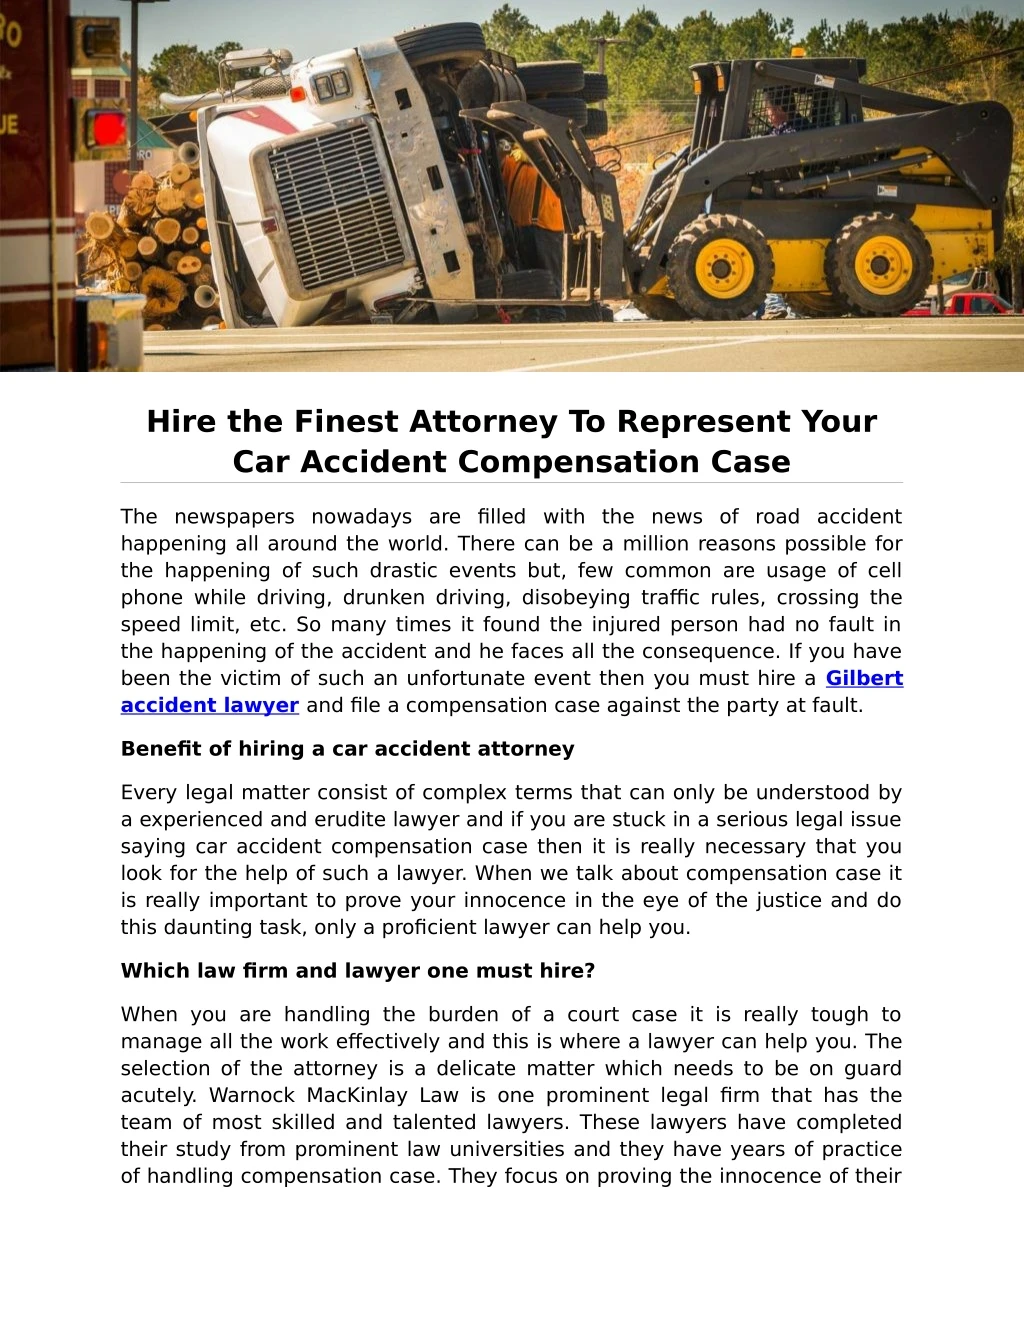 hire the finest attorney to represent your